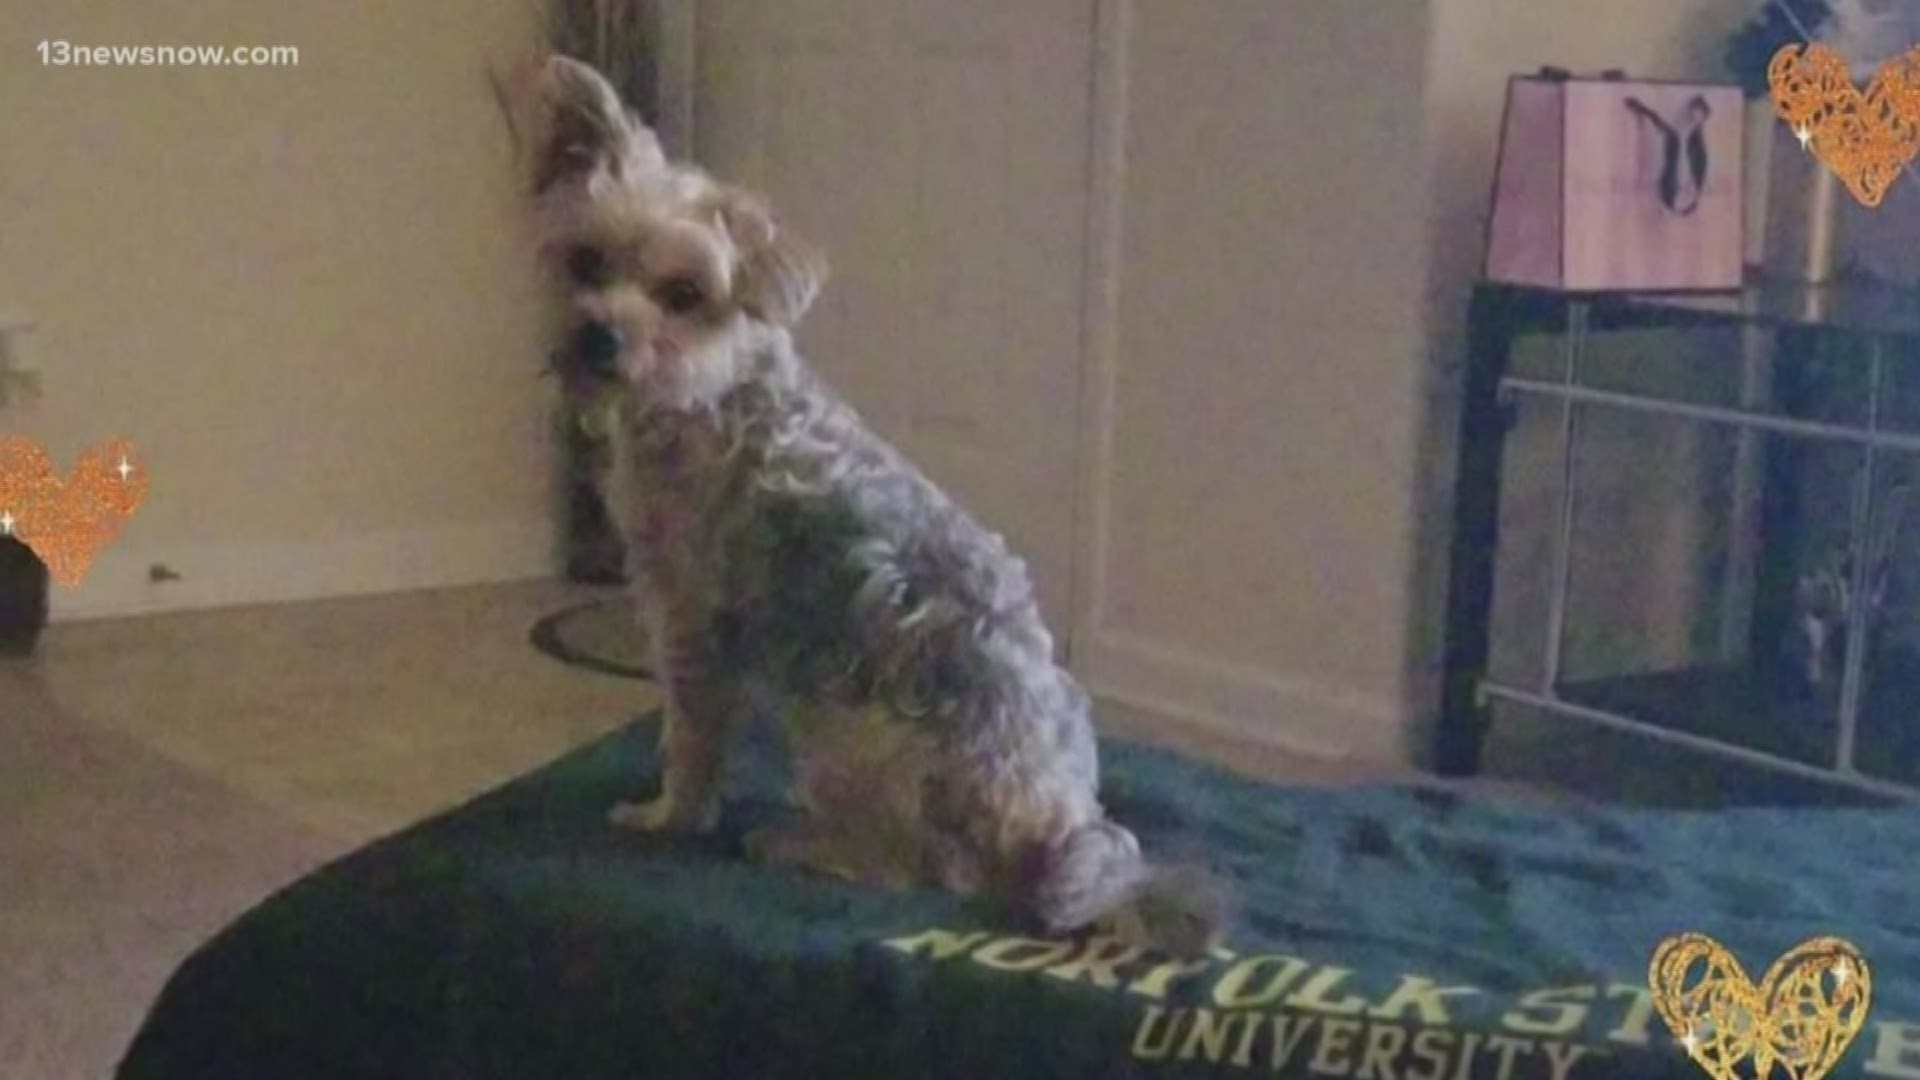 Nakita Young's Yorkie-Shih Tzu mix was killed by an off-leash Pit Bull at the Oceanfront during Memorial Day weekend.